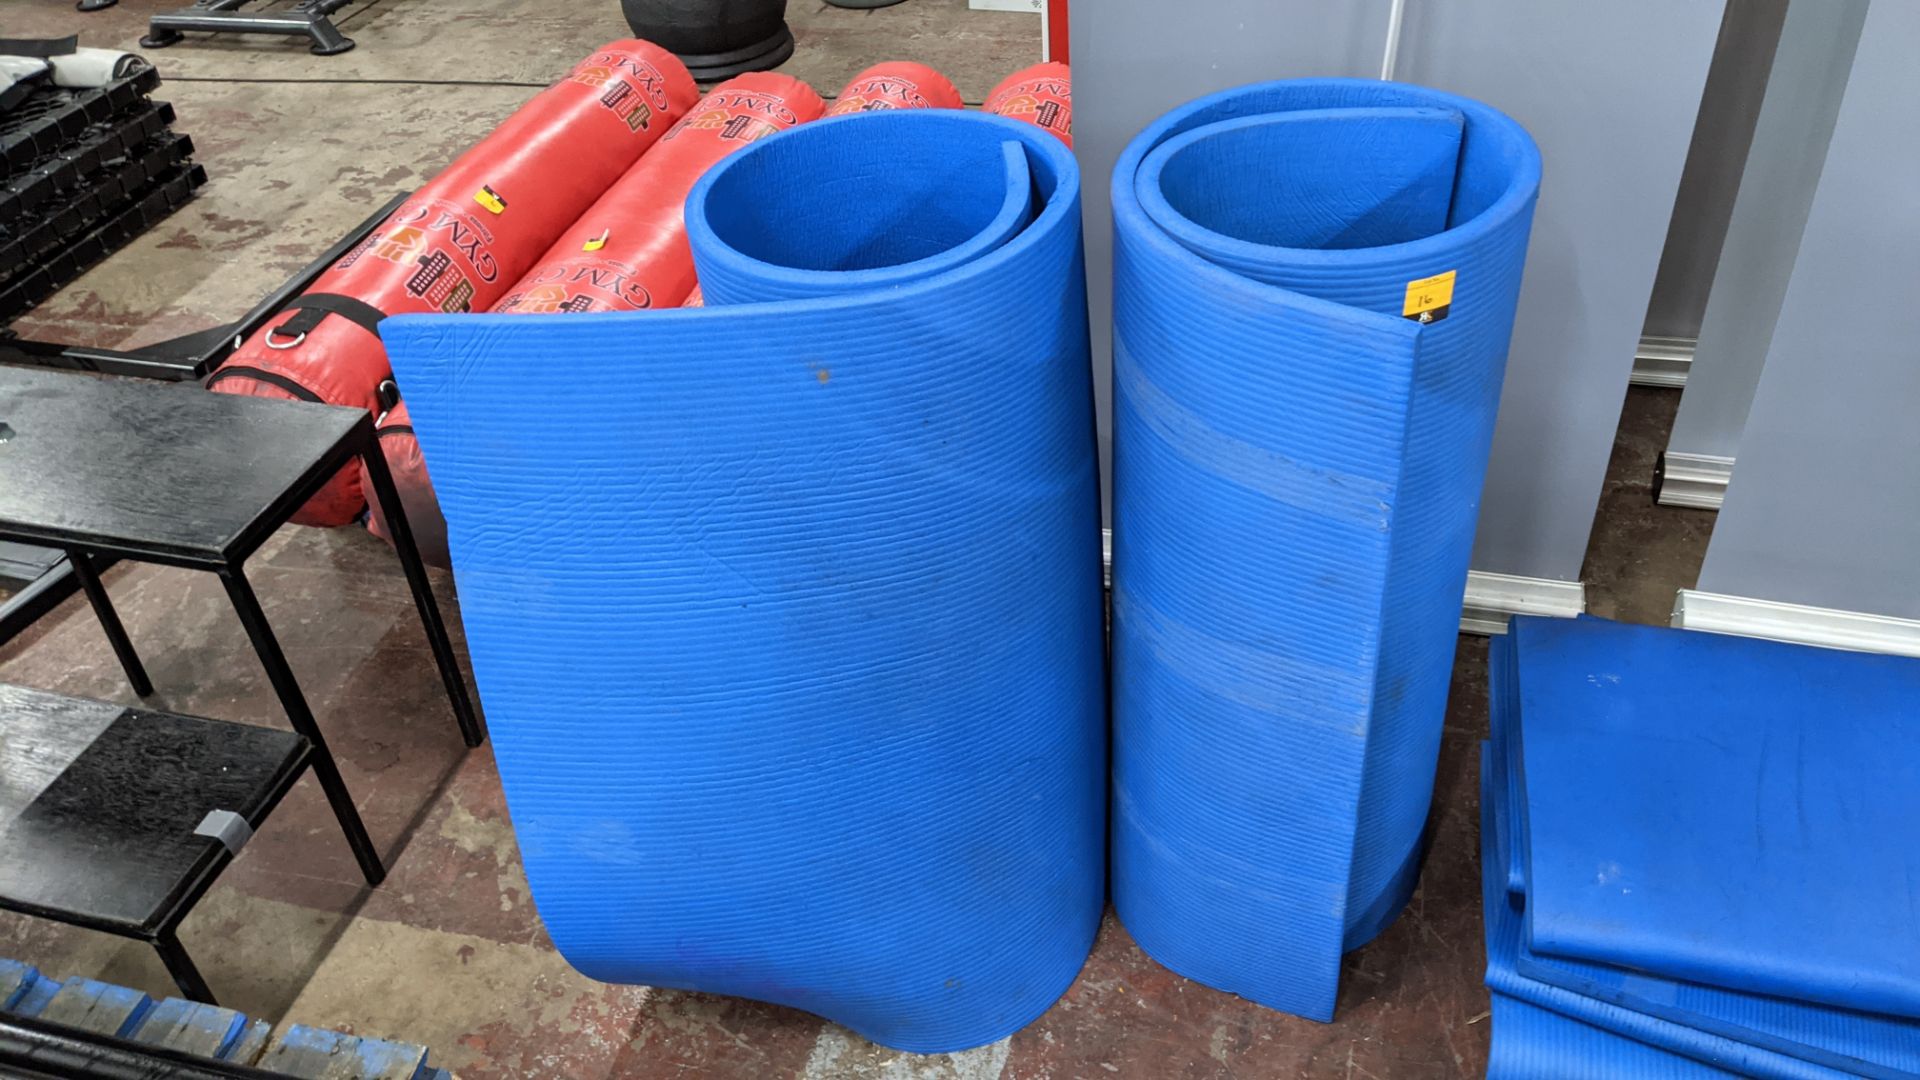 2 off blue roll up foam exercise mats, each measuring 2m x 1m - Image 3 of 5